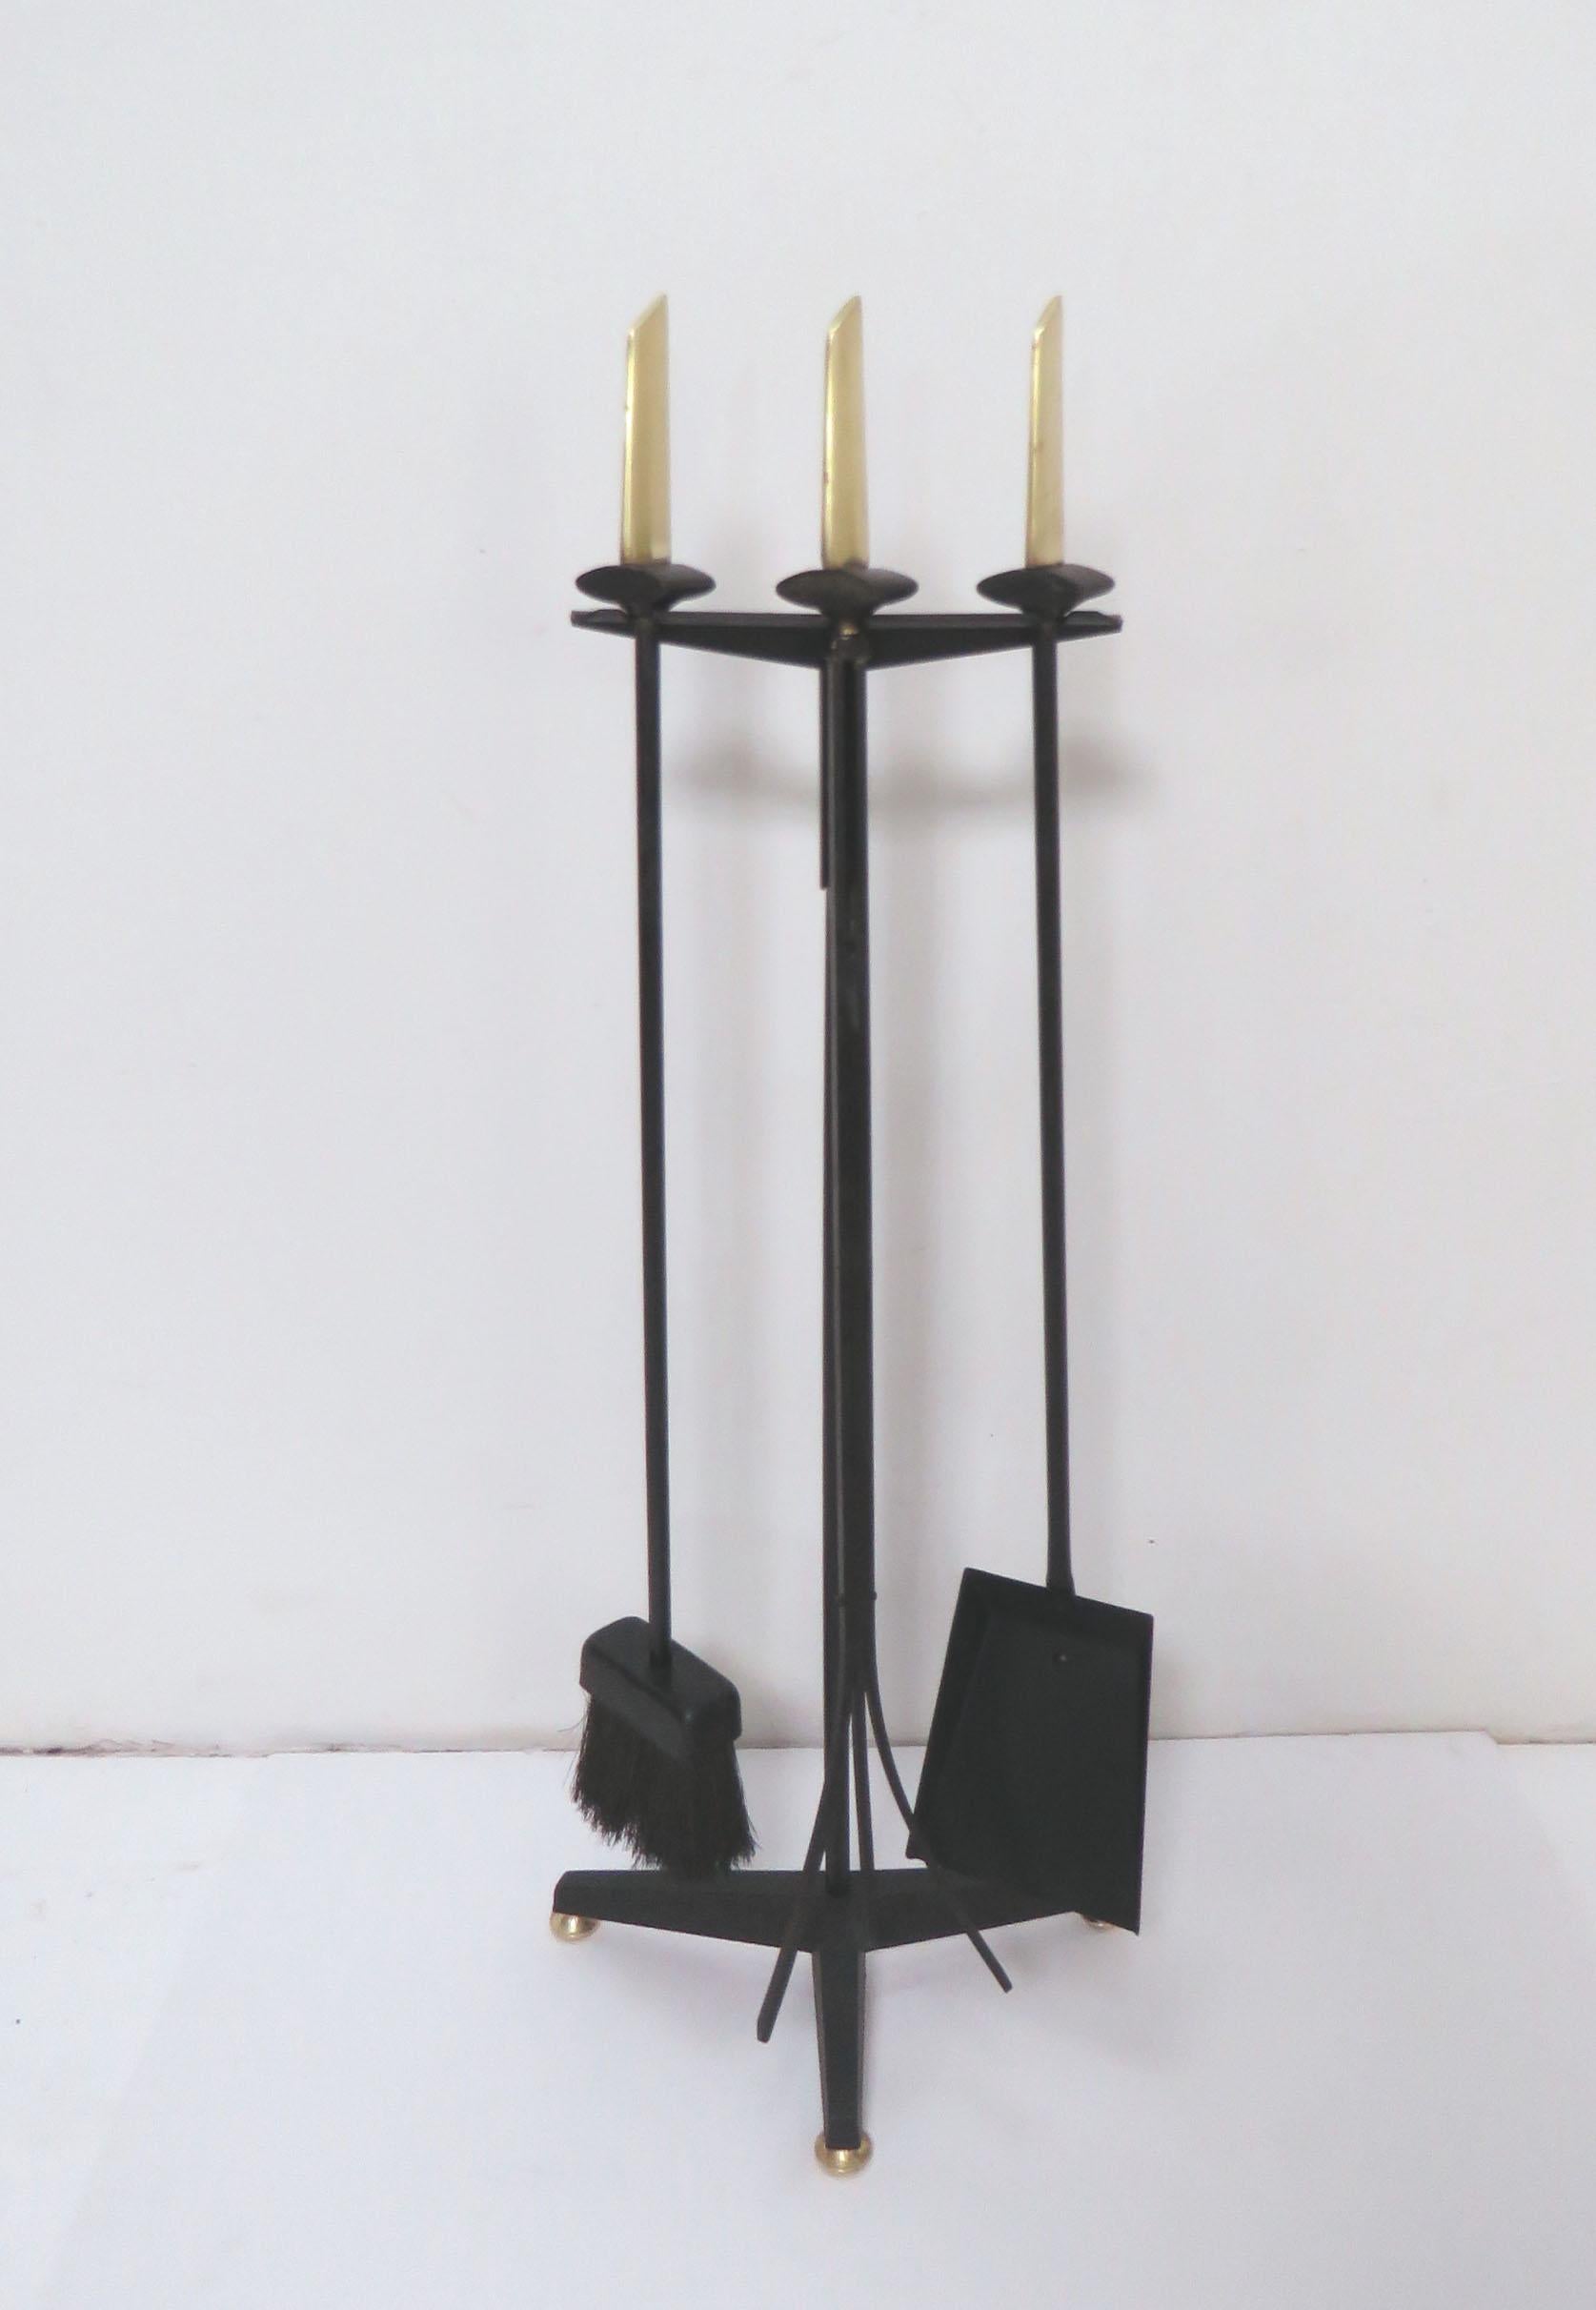 Elegant set of modernist fireplace tools with handles in solid brass and iron, designed by Donald Deskey for Bennett, circa 1950s.